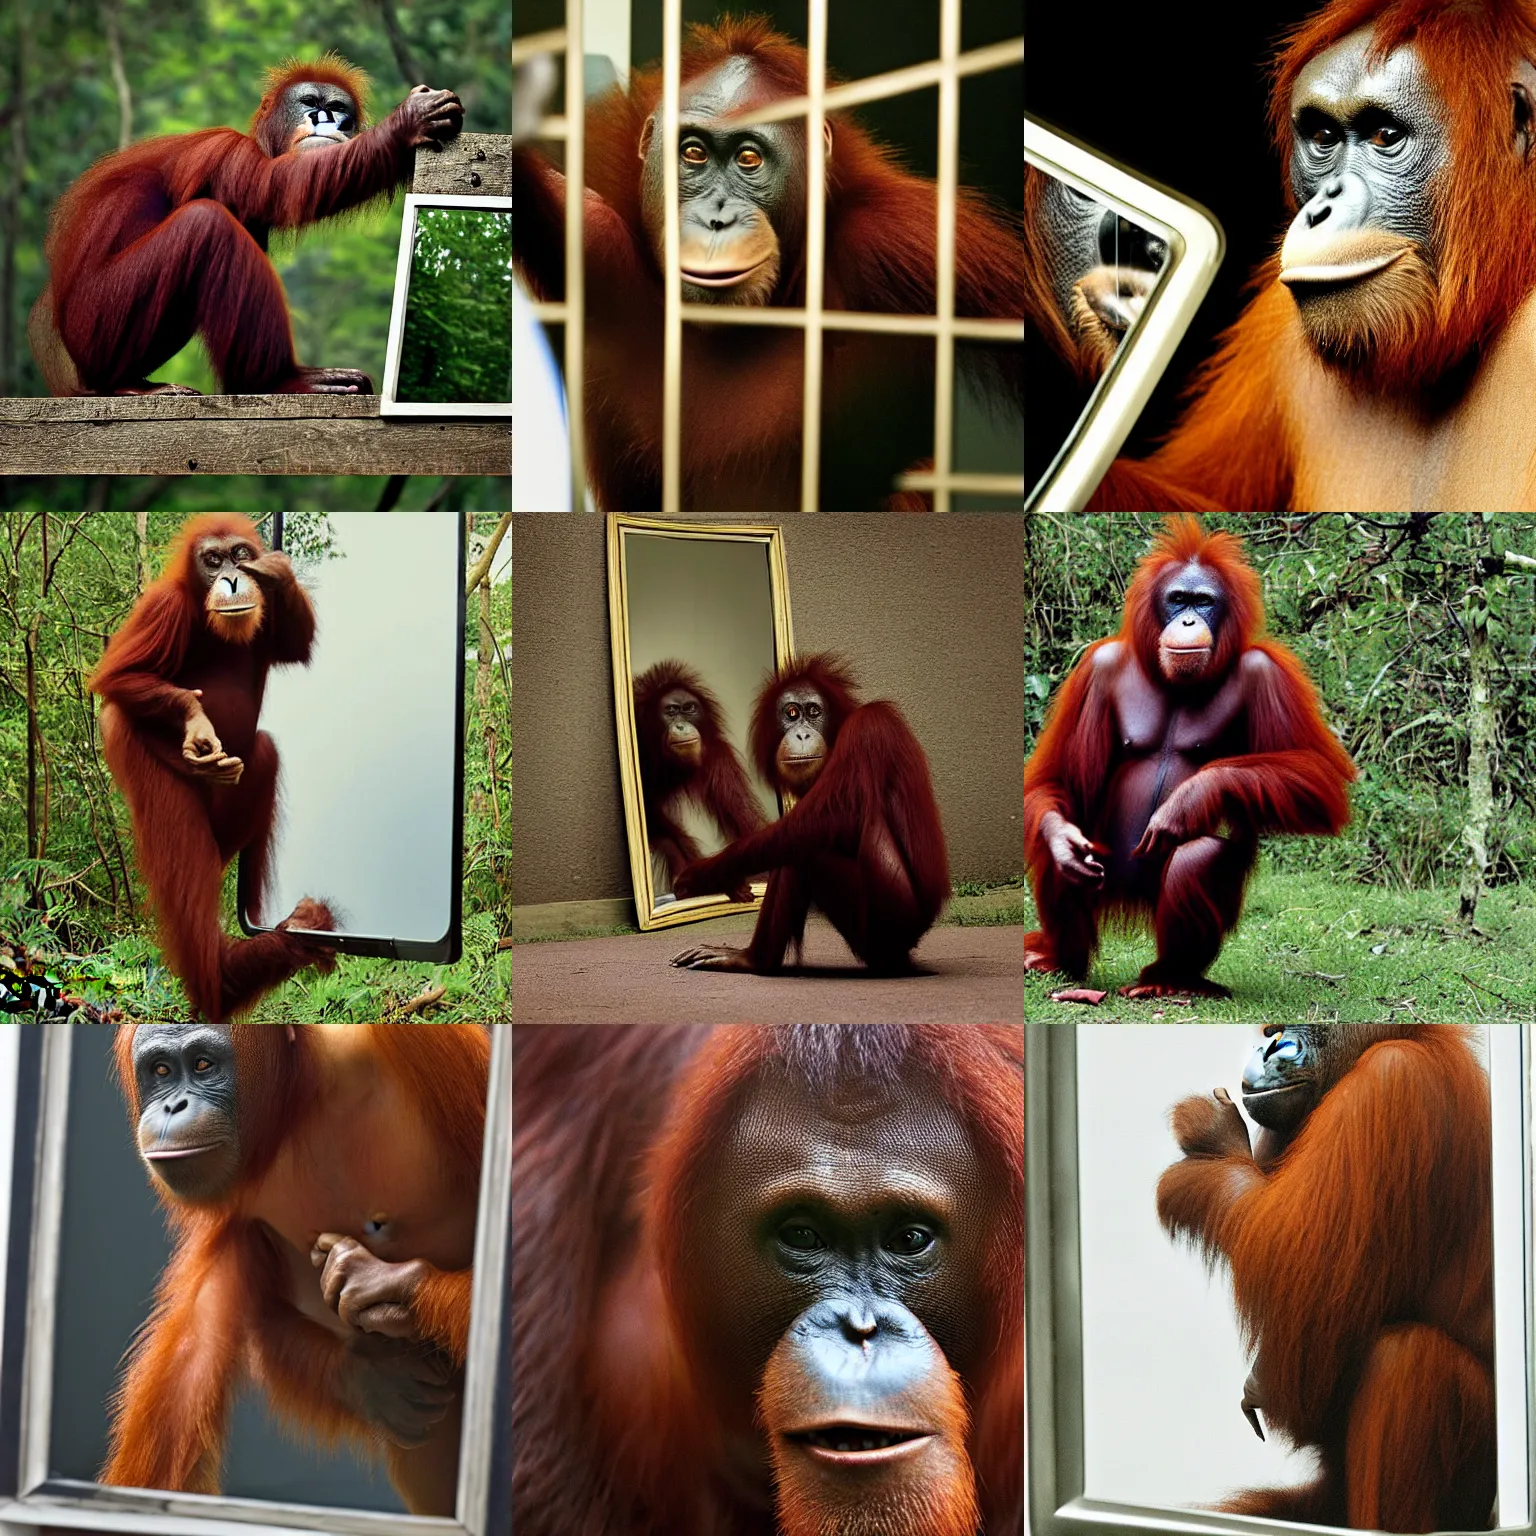 Prompt: photograph by annie leibovitz of orangutan wearing a suit arguing with his mirror